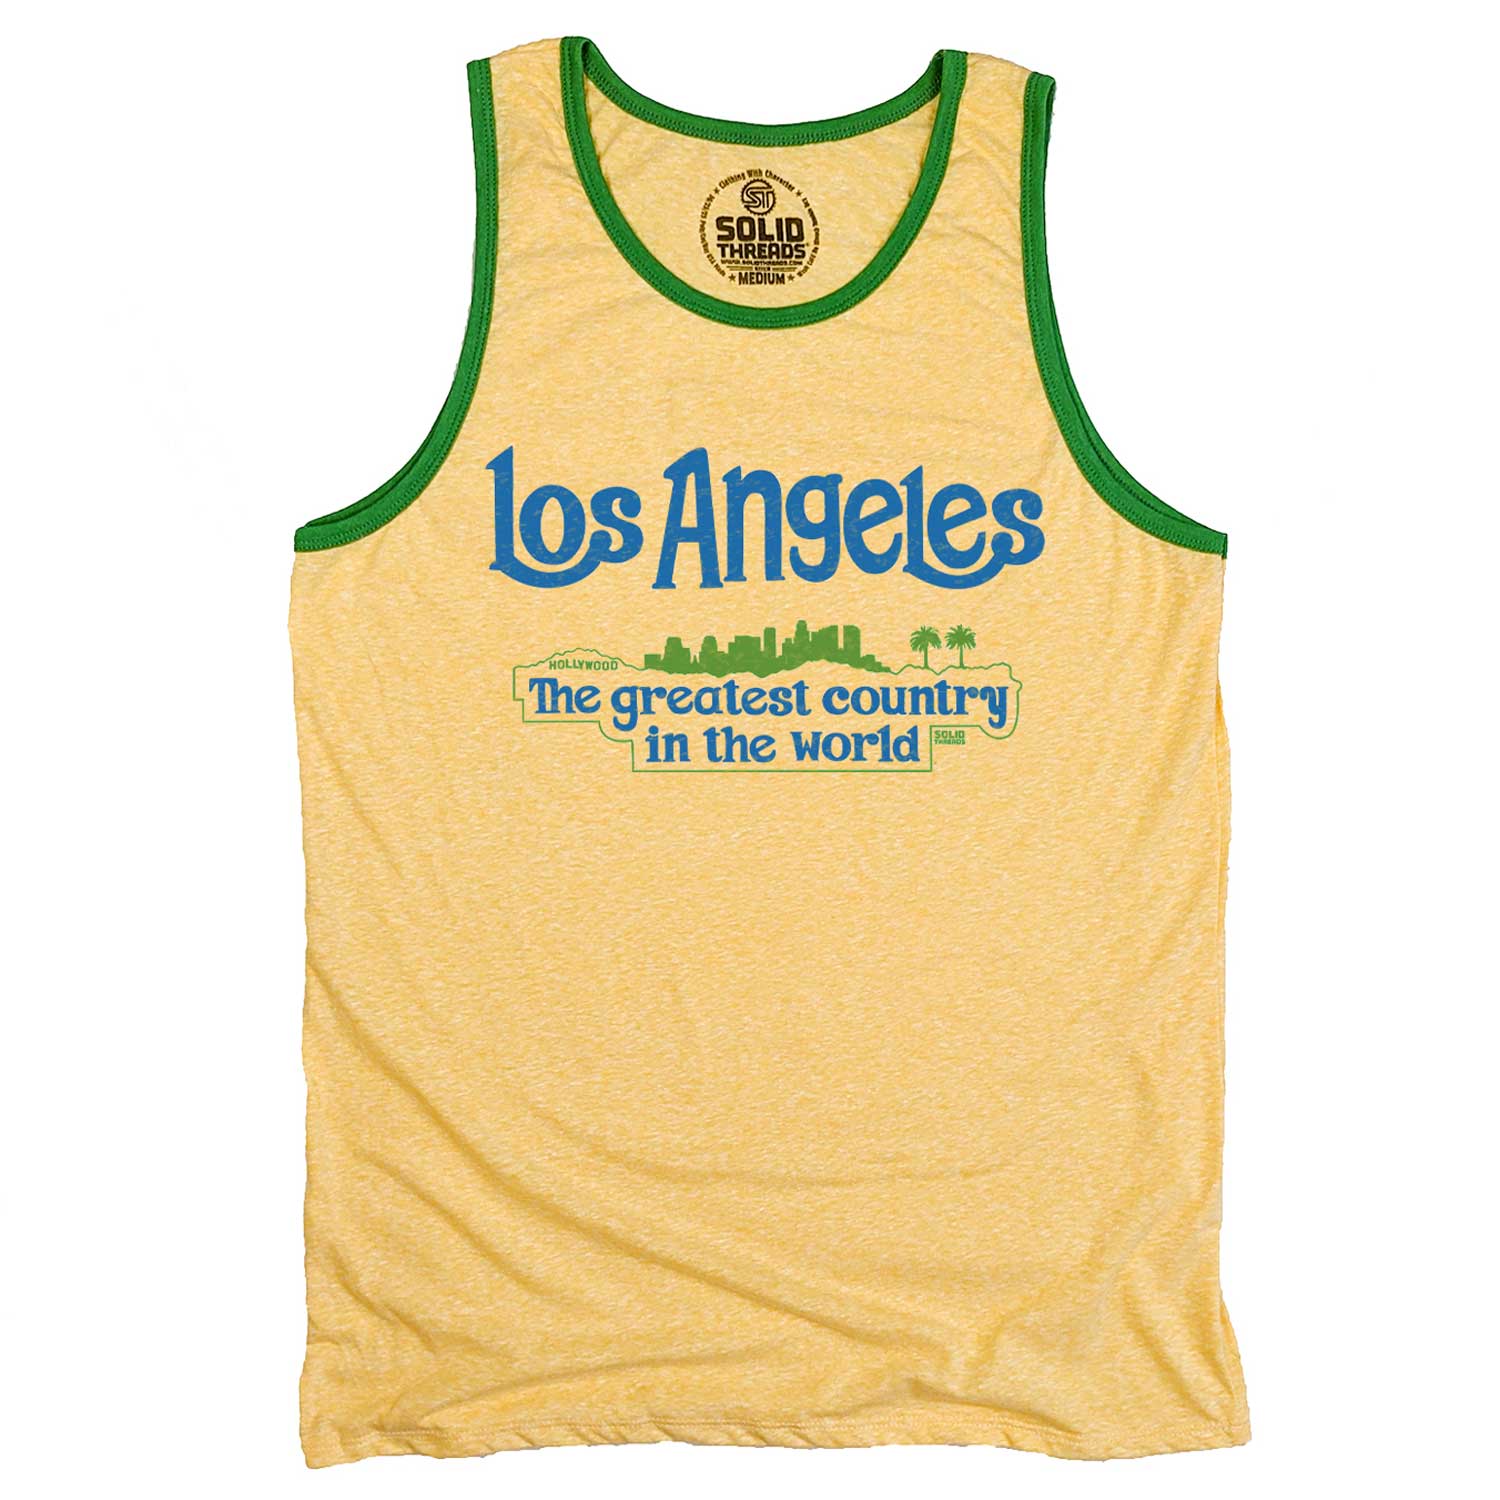 Los Angeles Greatest Country in The World Retro Women's California Graphic Tee | Solid Threads Triblend Gold / Large